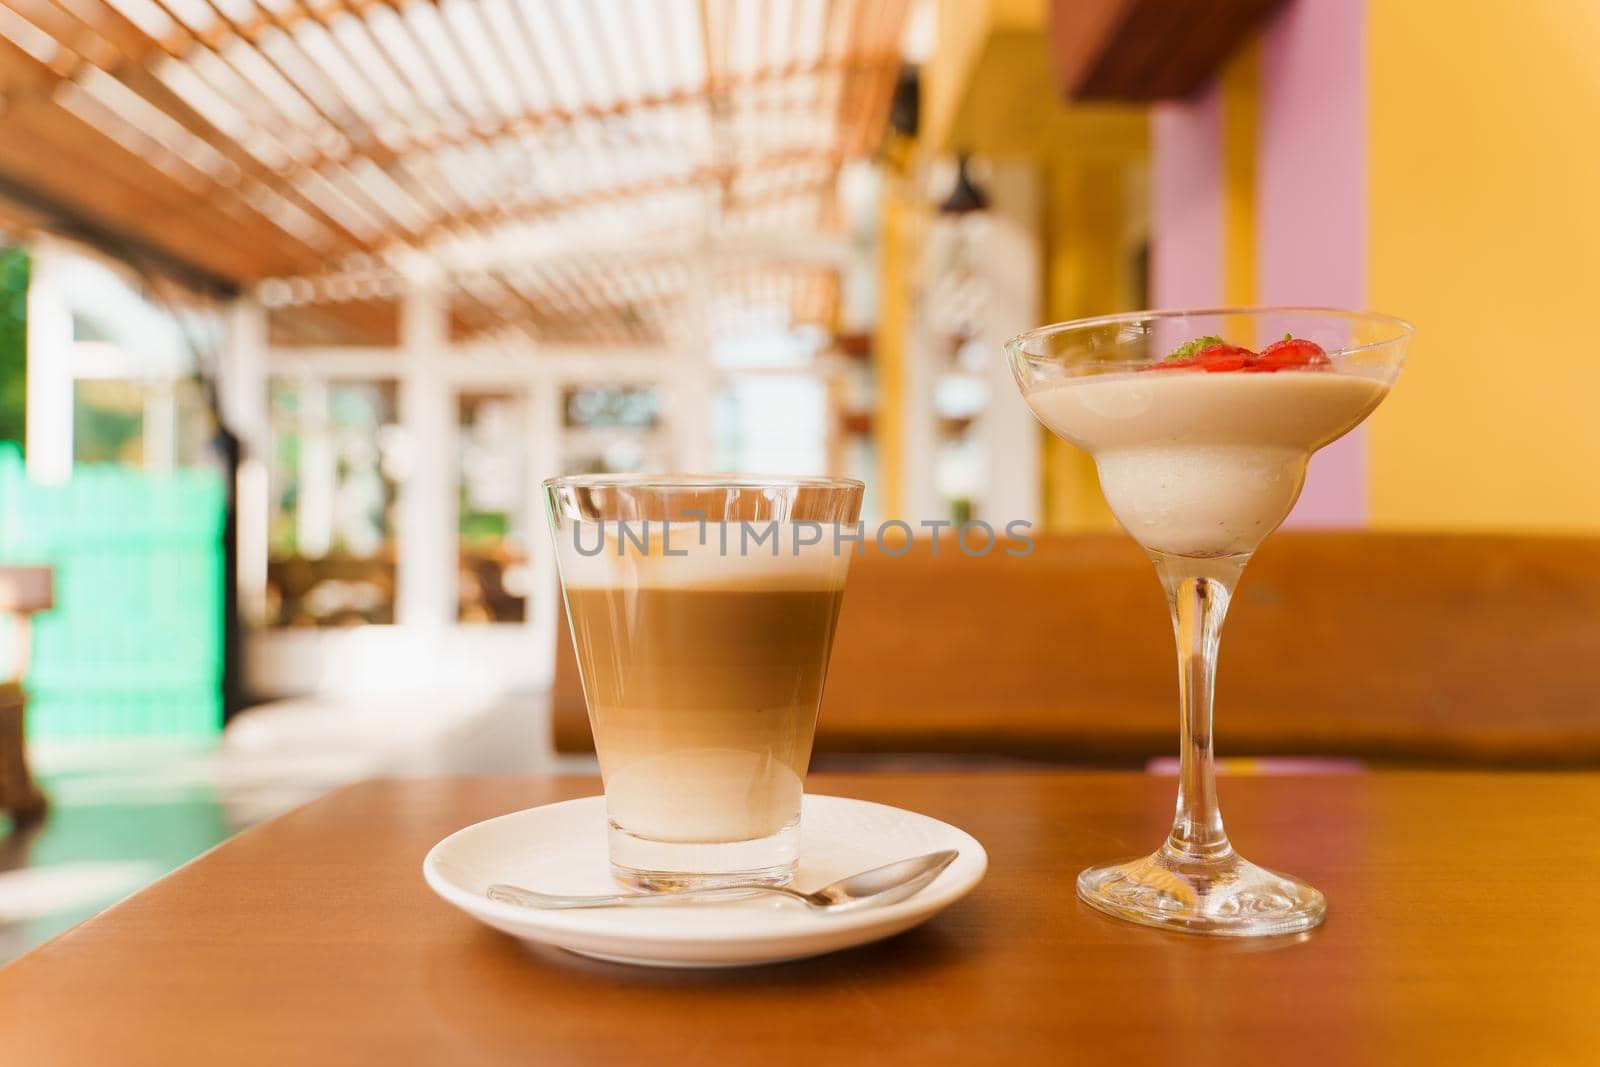 Creamy dessert with strawberries in glass, cappuccino on wooden table. Appetizing dessert and latte on the background of the restaurant.